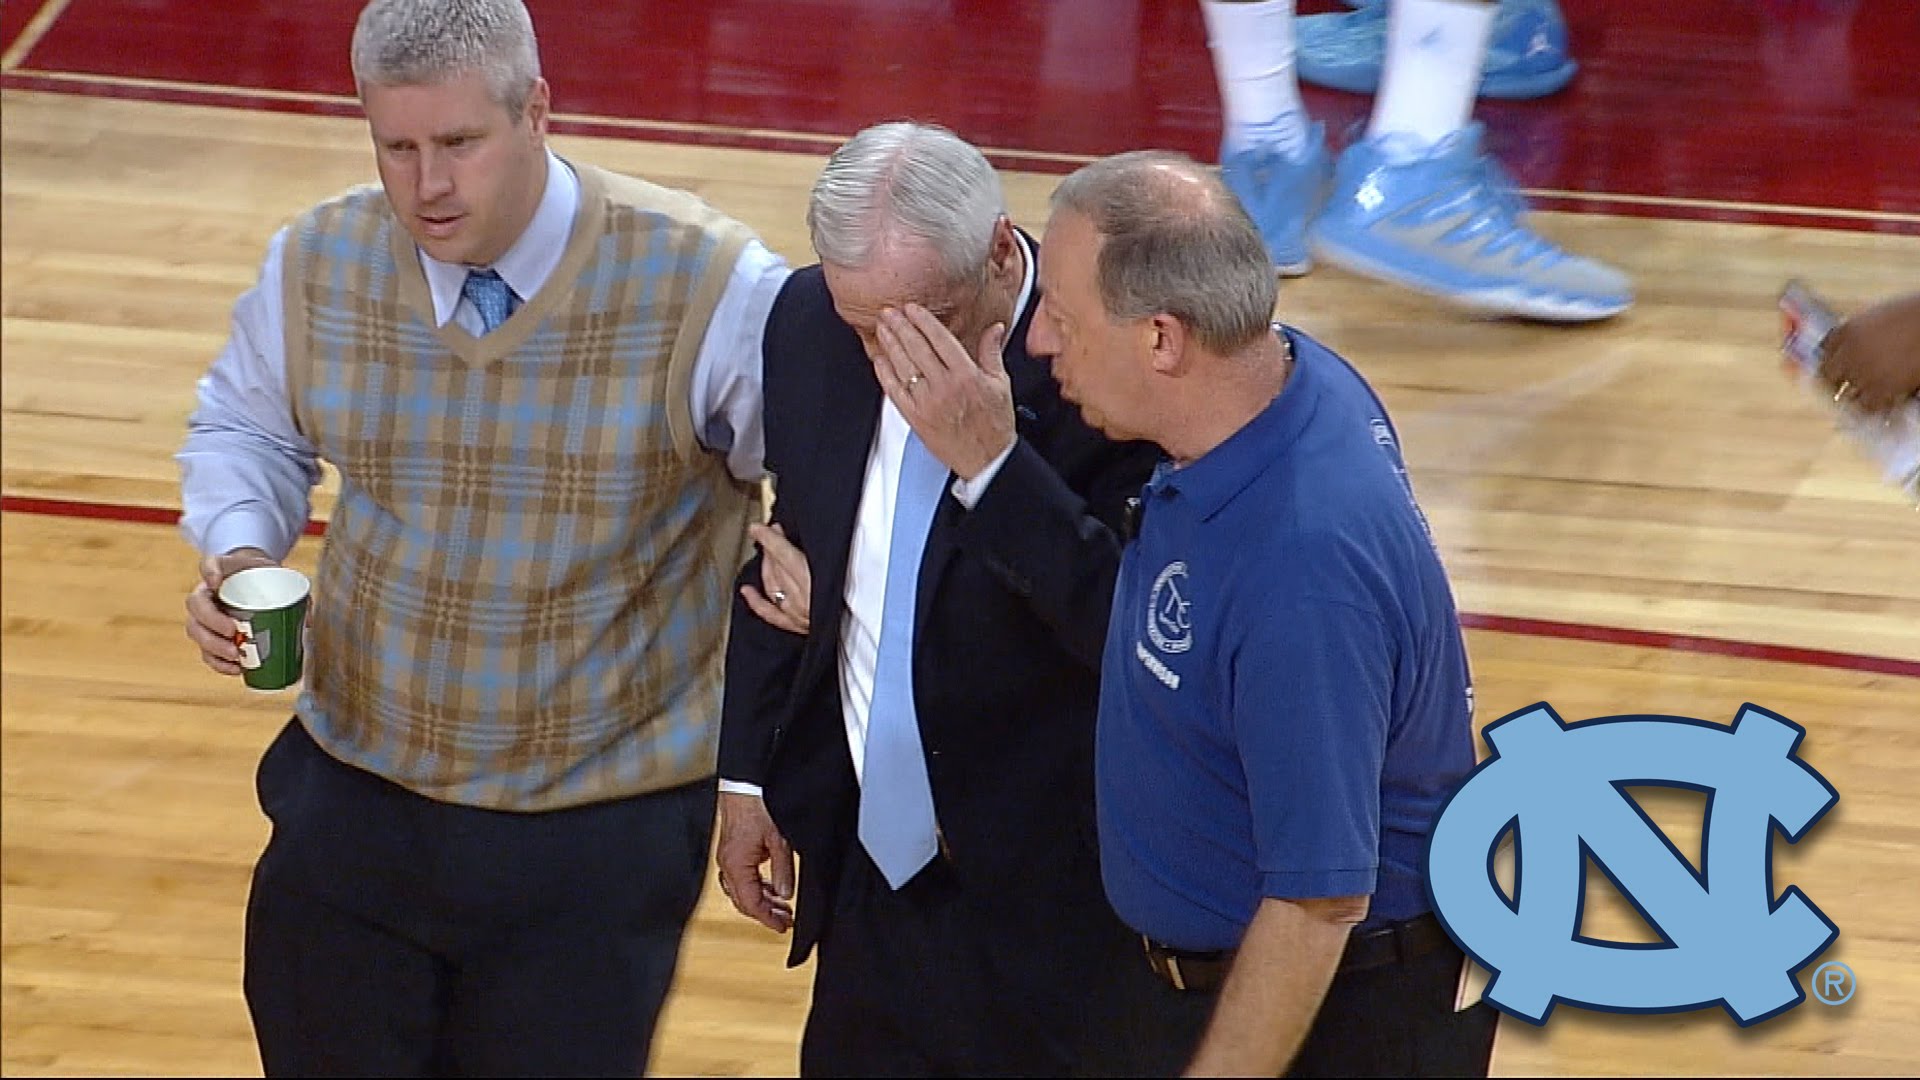 North Carolina head coach Roy Williams collapses during timeout